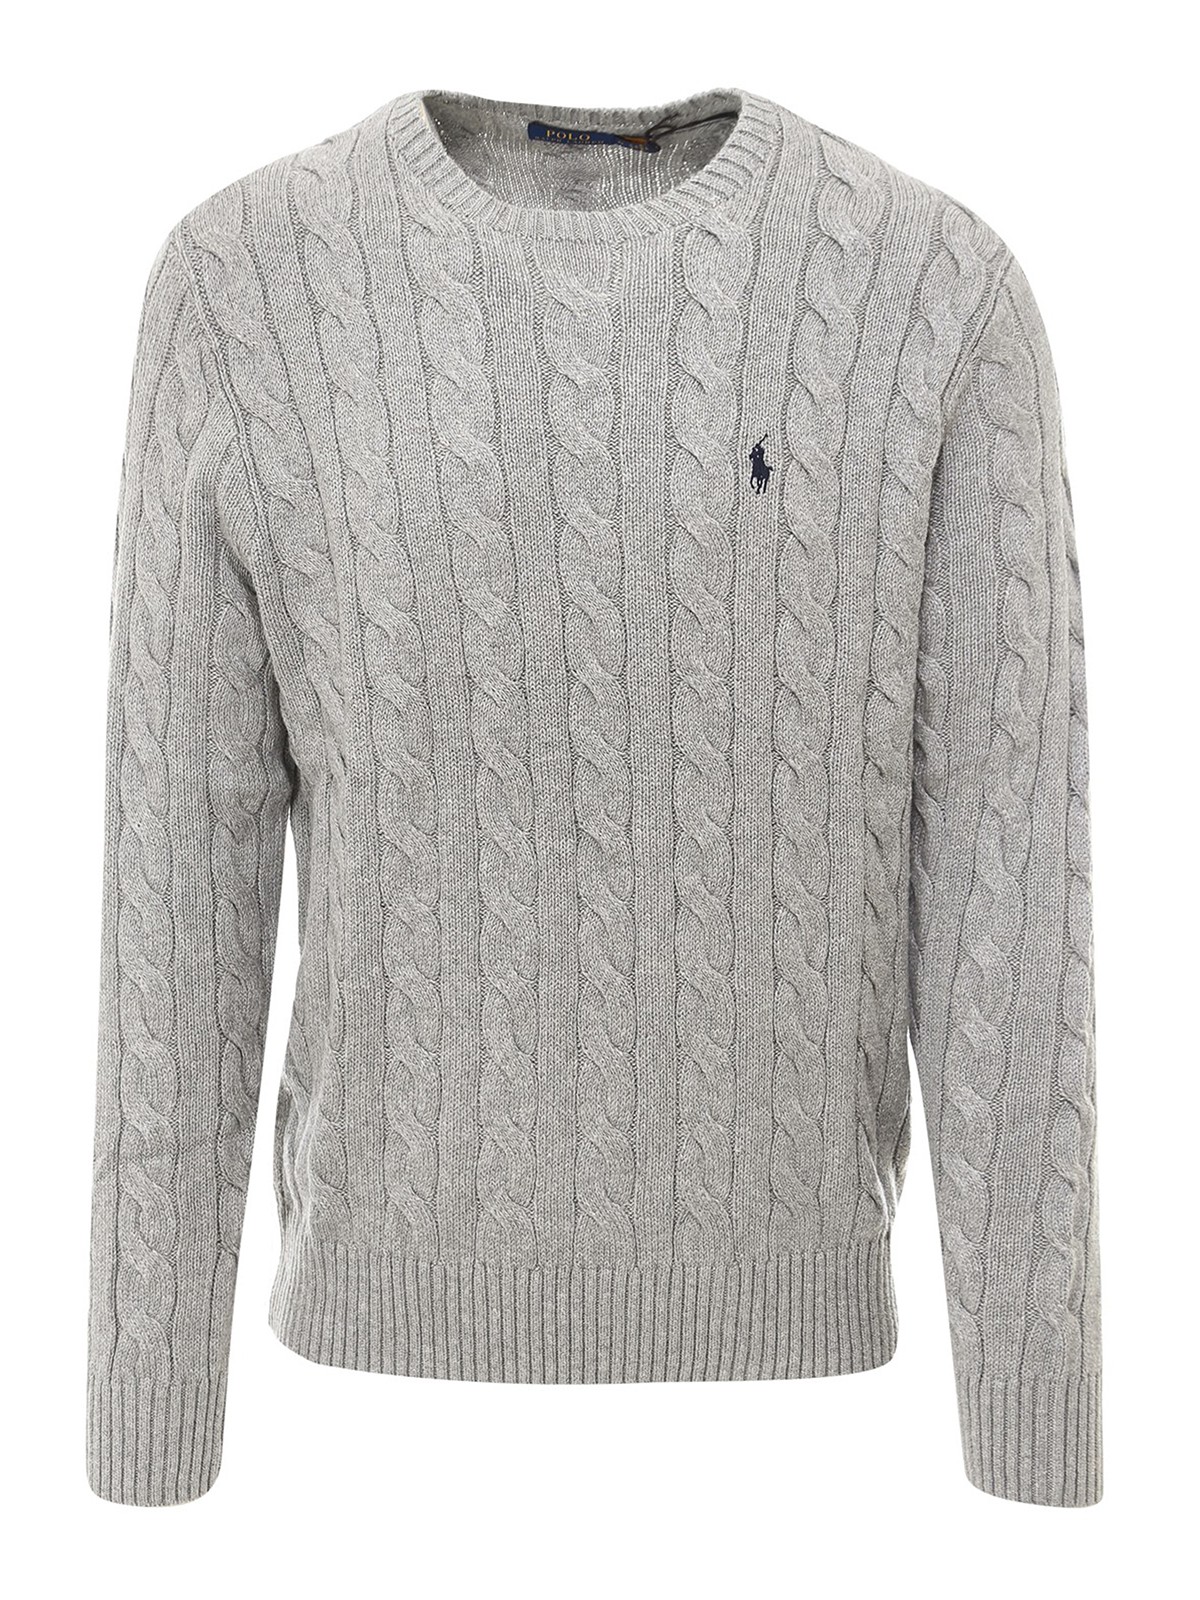 Polo Ralph Lauren Cable Knit Jumper In Grey